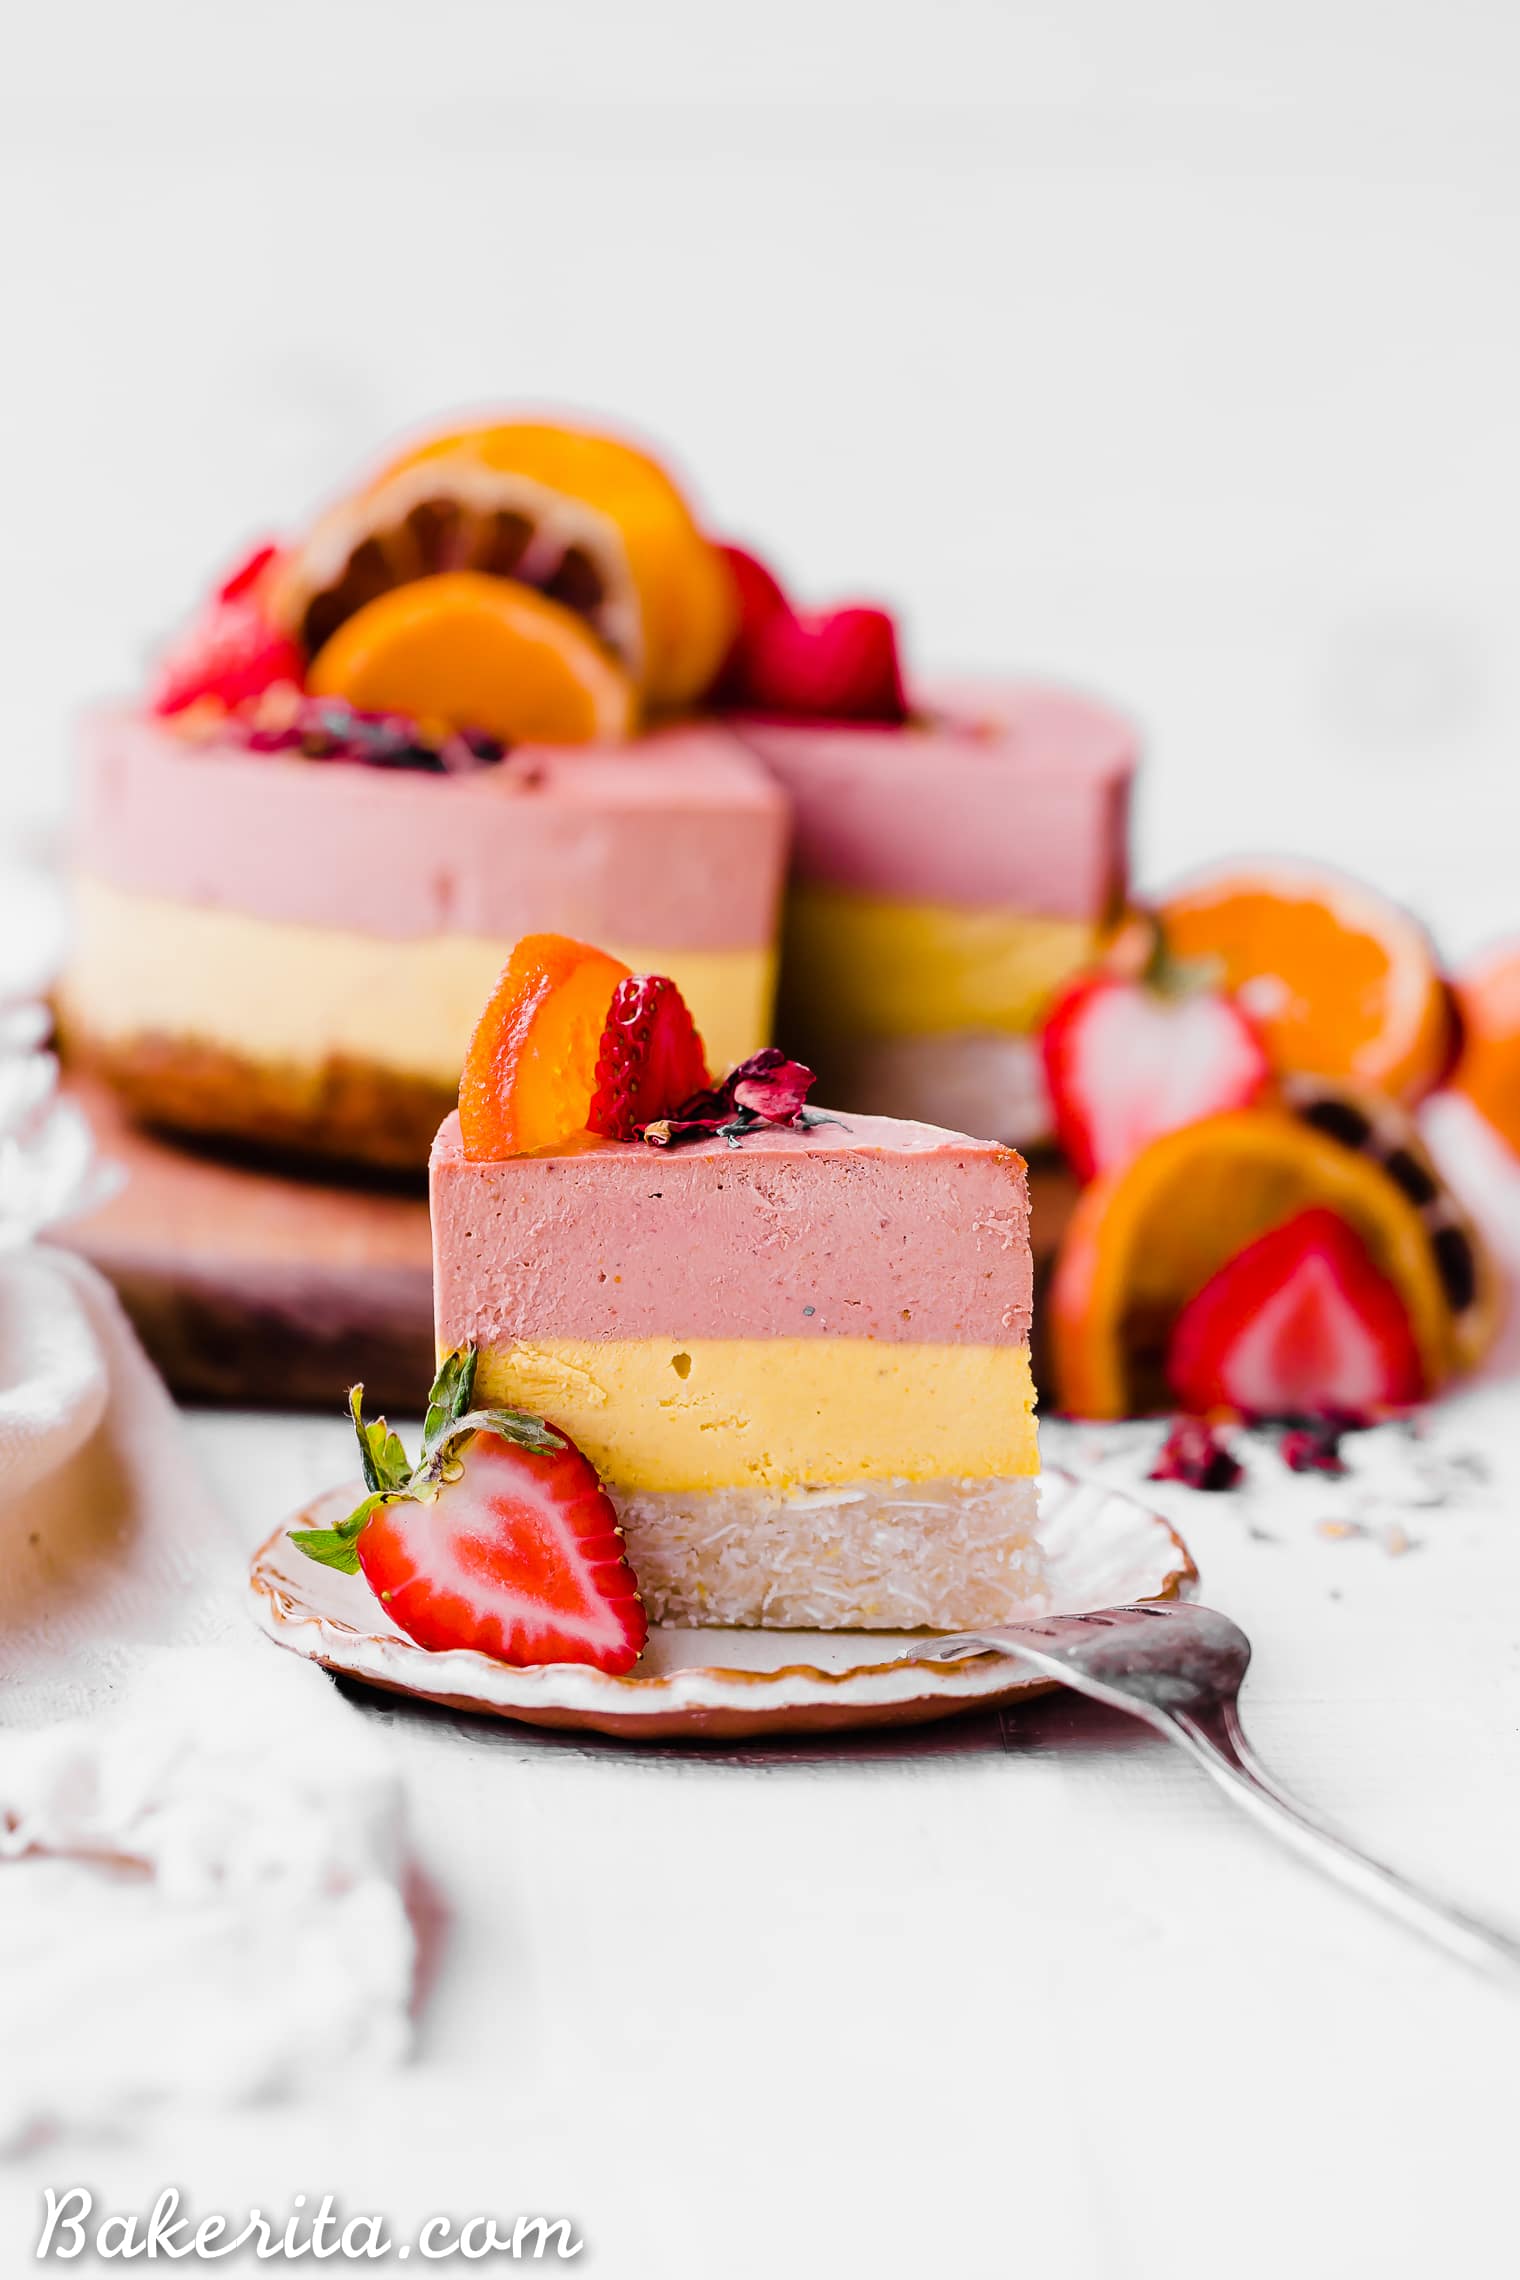 This Strawberry Orange Cheesecake with Coconut Crust is not just beautiful, but it's bright in flavor and absolutely delicious! The lemony coconut macaroon crust is perfect with the strawberry and orange flavors. You're going to adore this gluten-free, paleo and vegan cheesecake. 